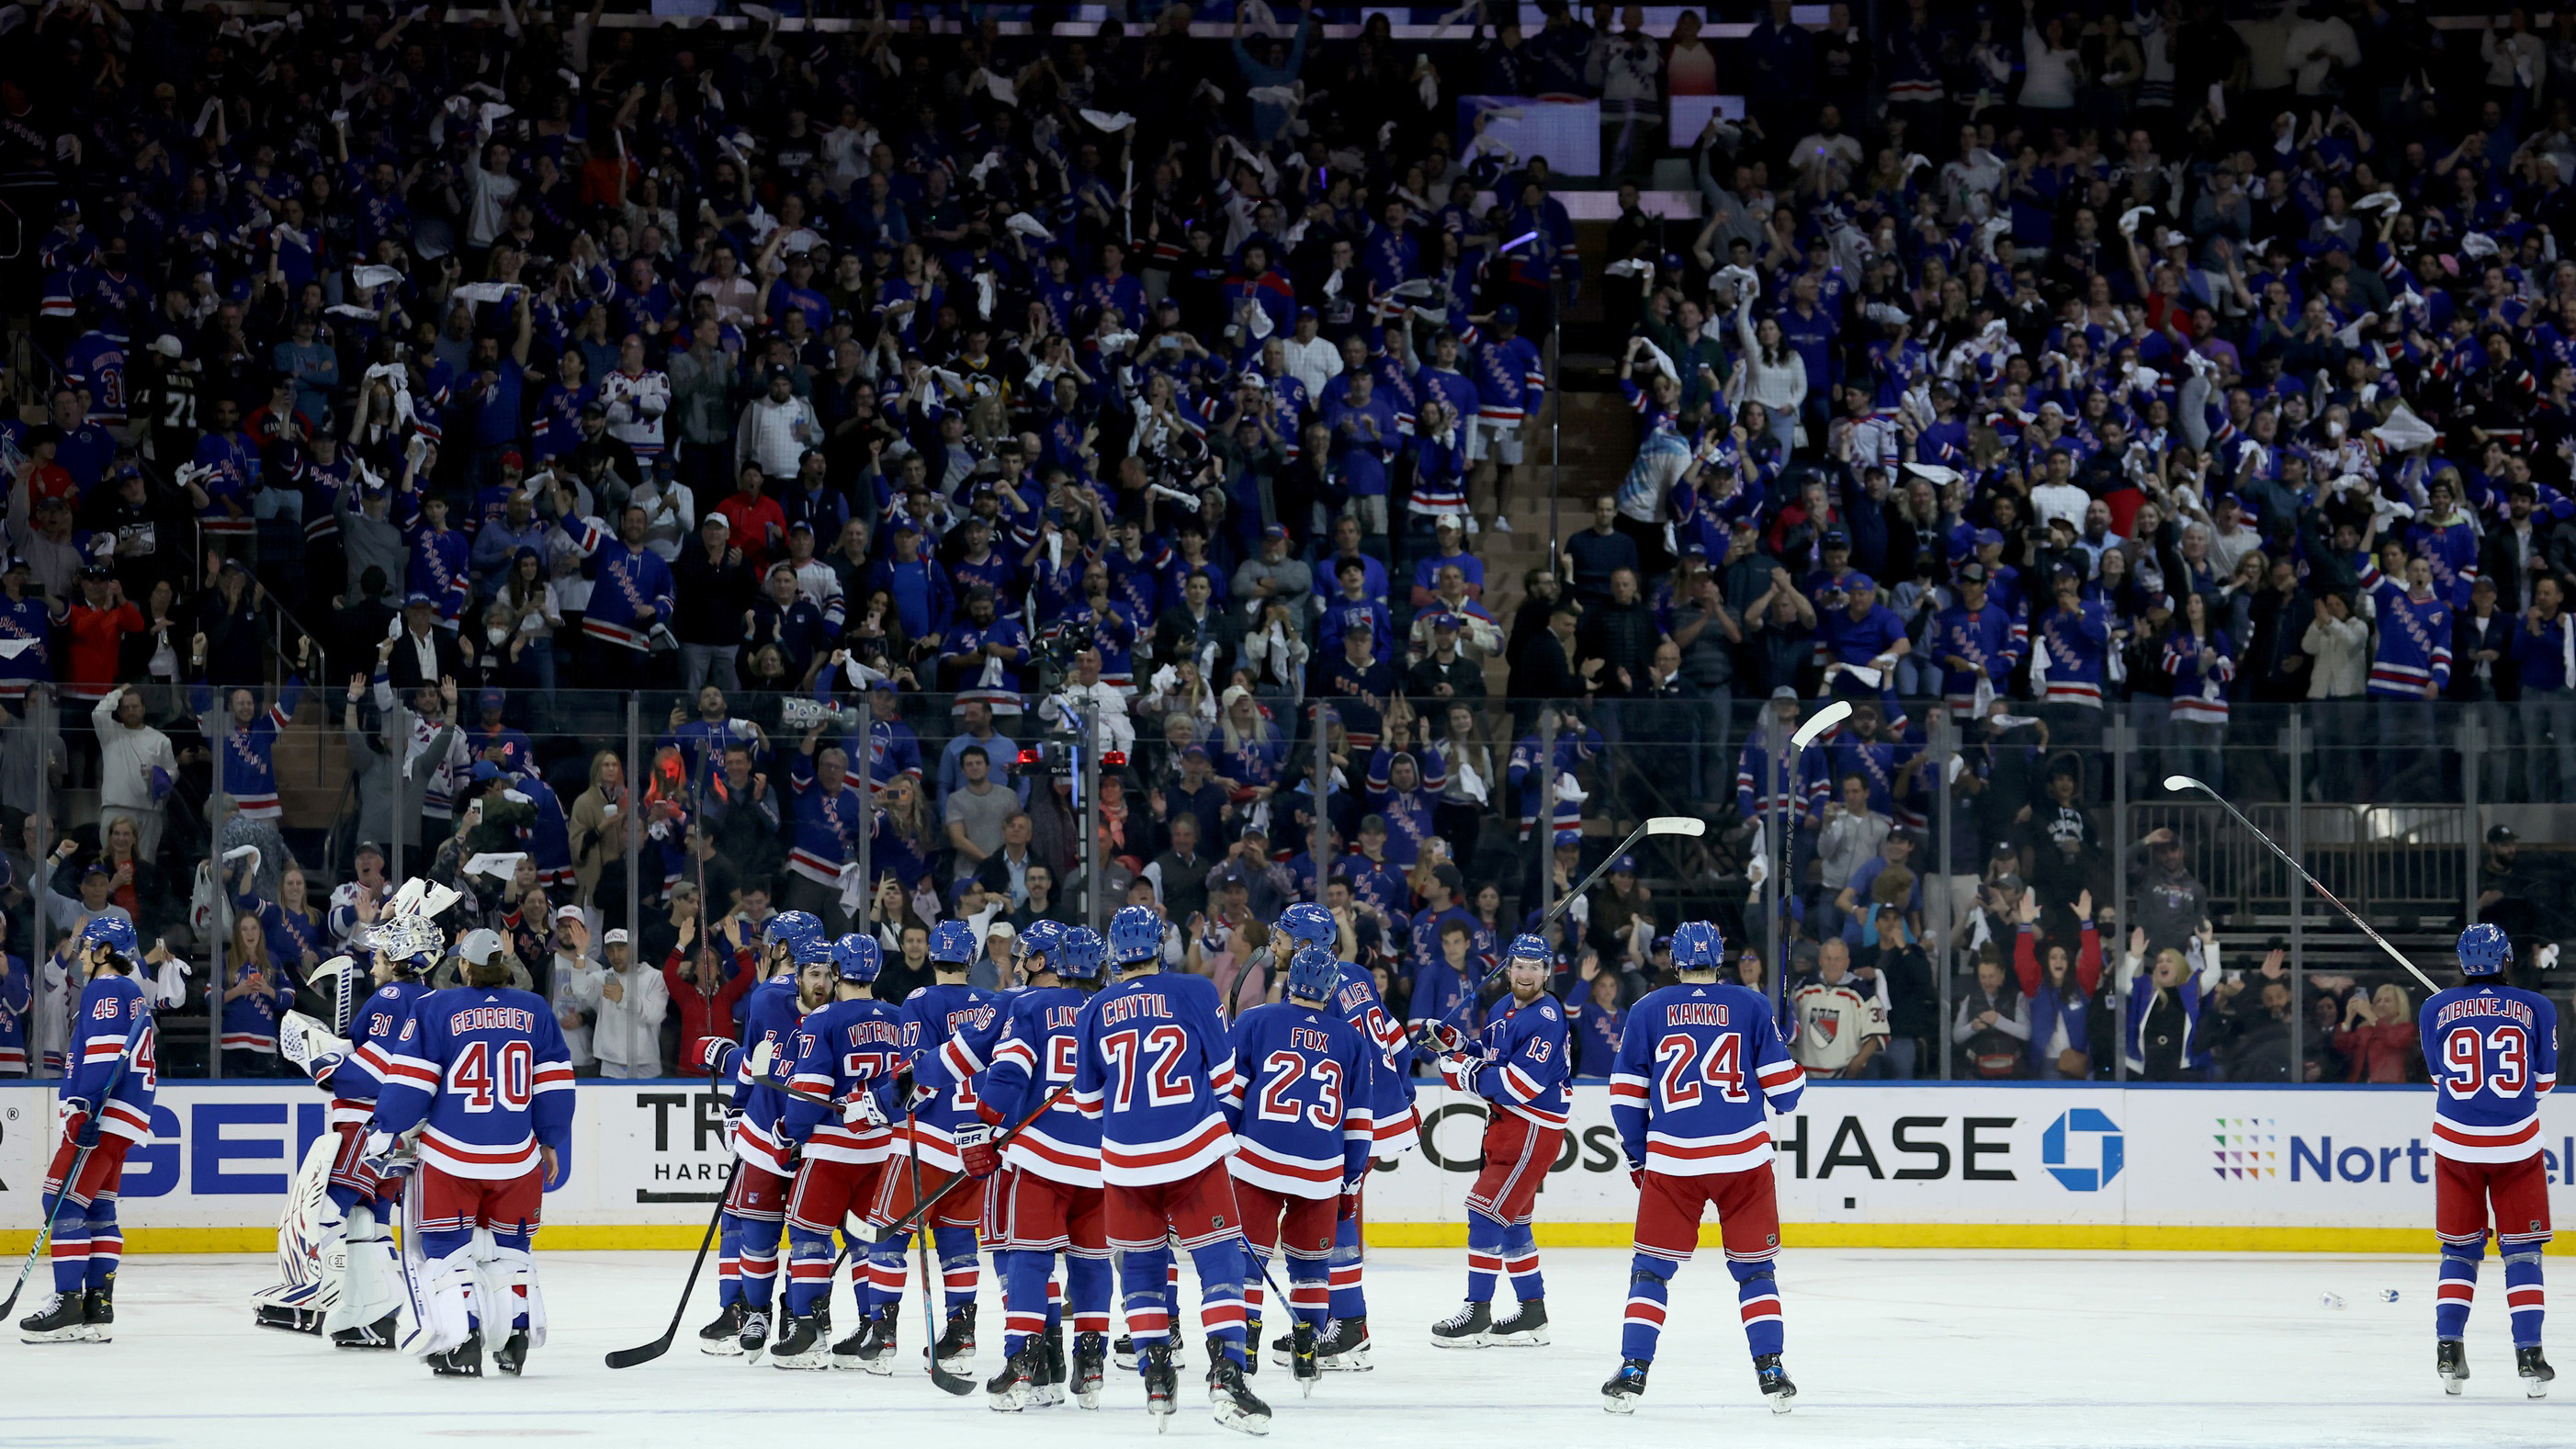 NHL playoffs: Rangers and Flames advance after Game 7 overtime